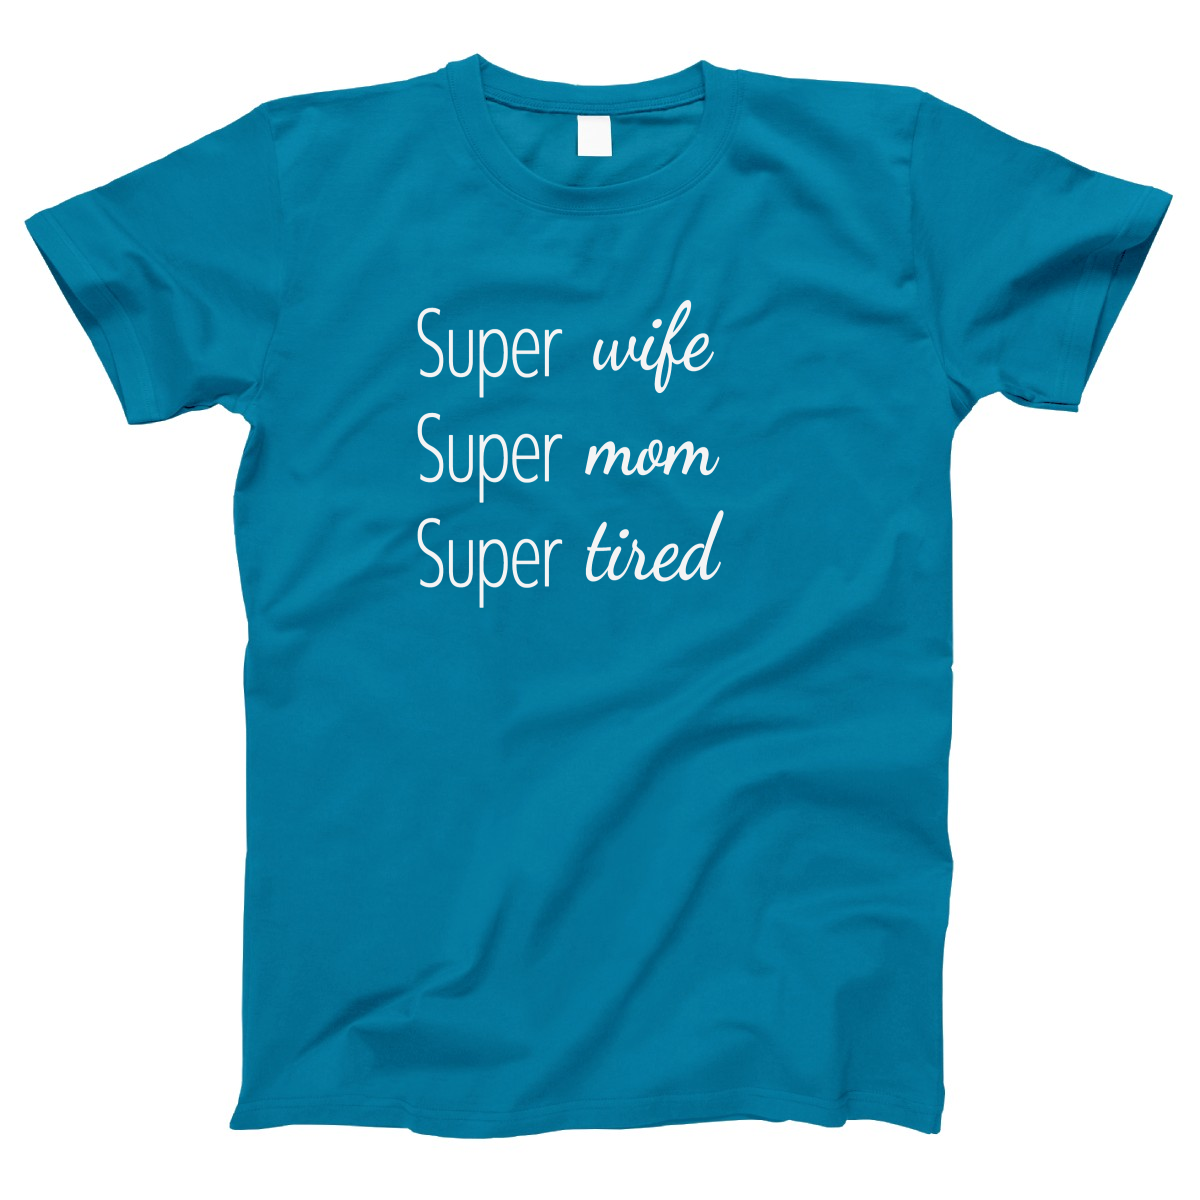 Super Mom Super Wife Super Tired Women's T-shirt | Turquoise